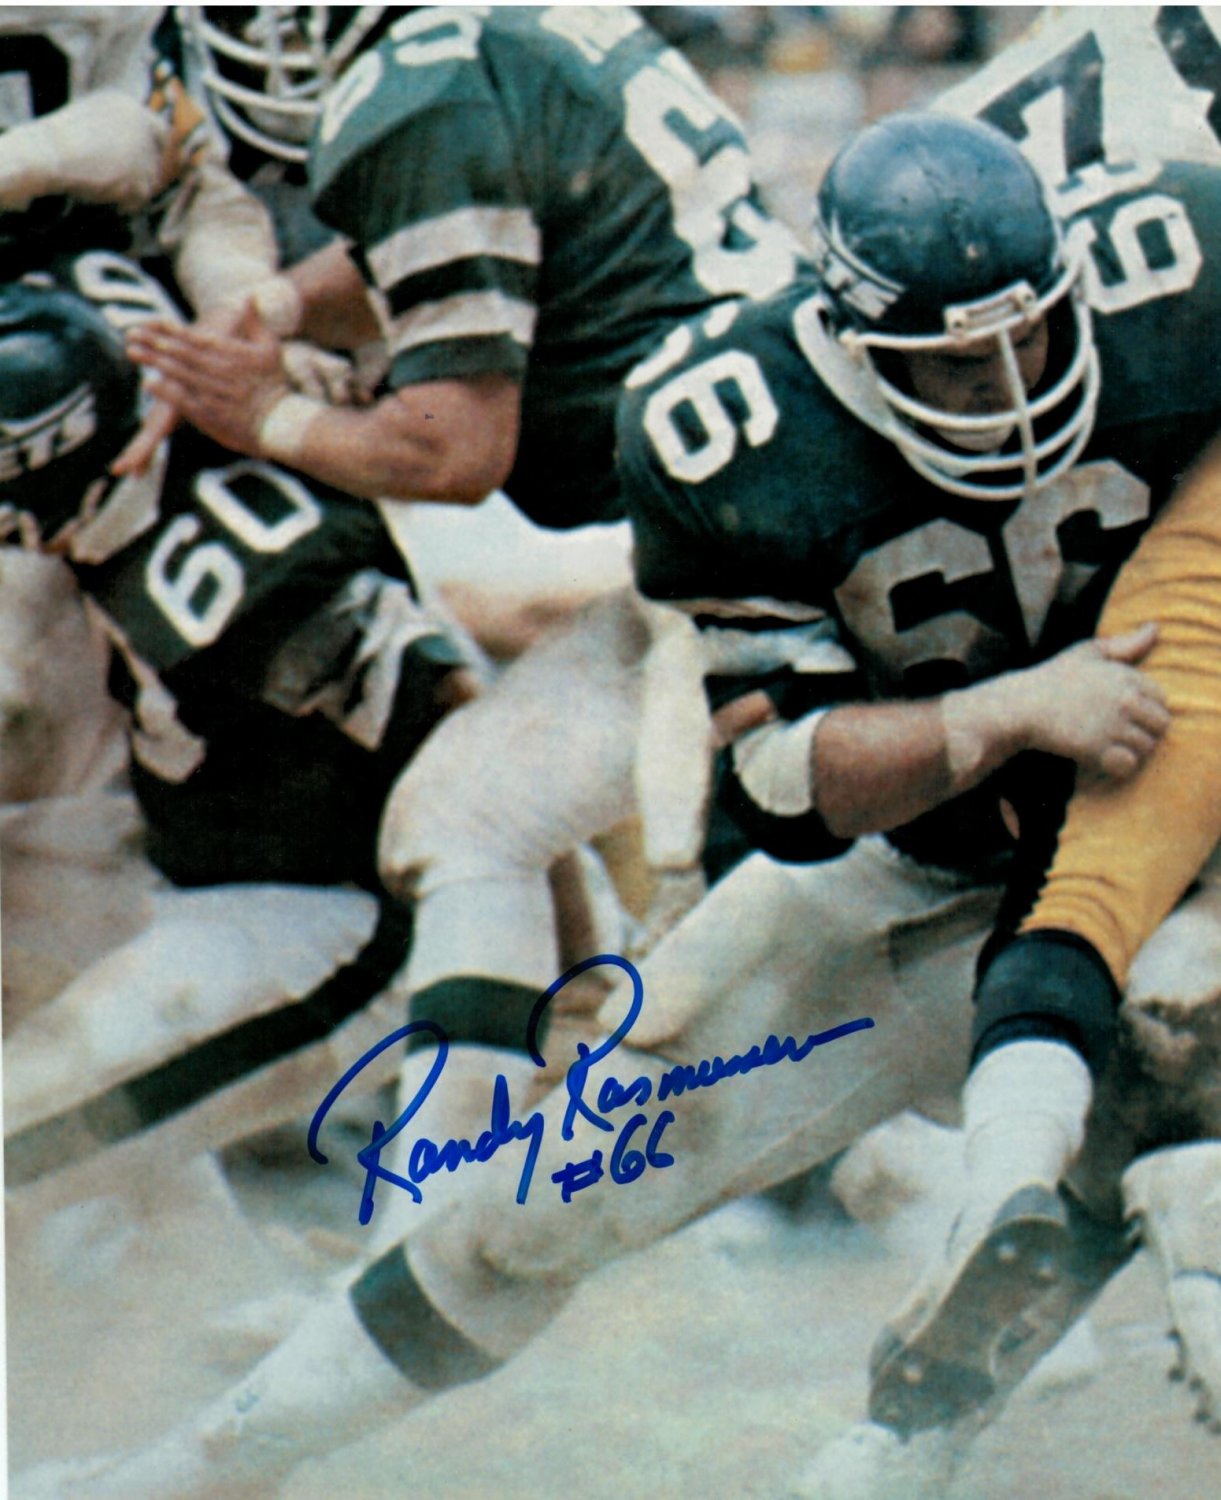 Randy Rasmussen New York Jets Autographed Signed 8x10 Photo